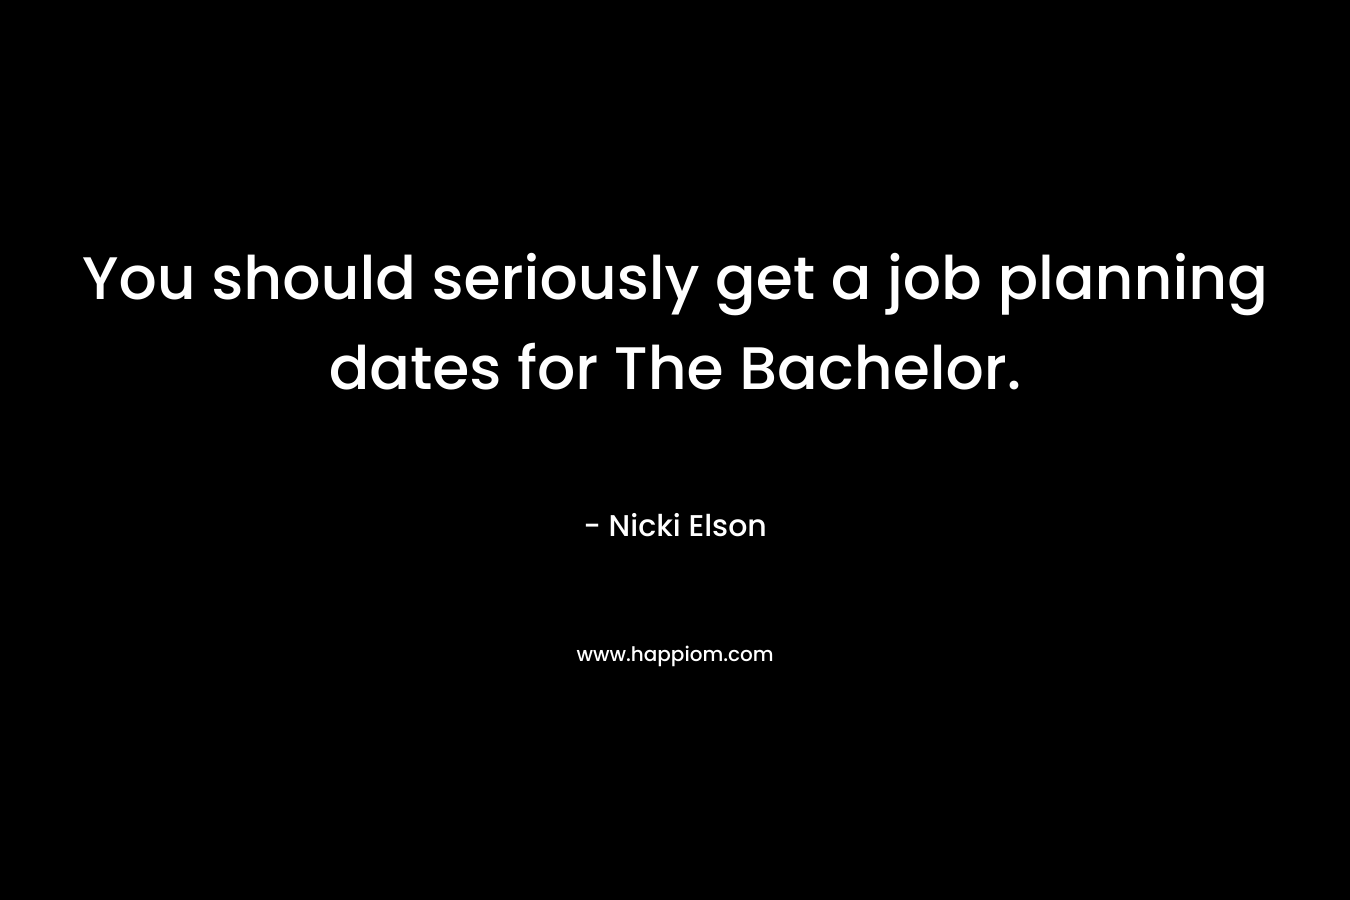 You should seriously get a job planning dates for The Bachelor. – Nicki Elson